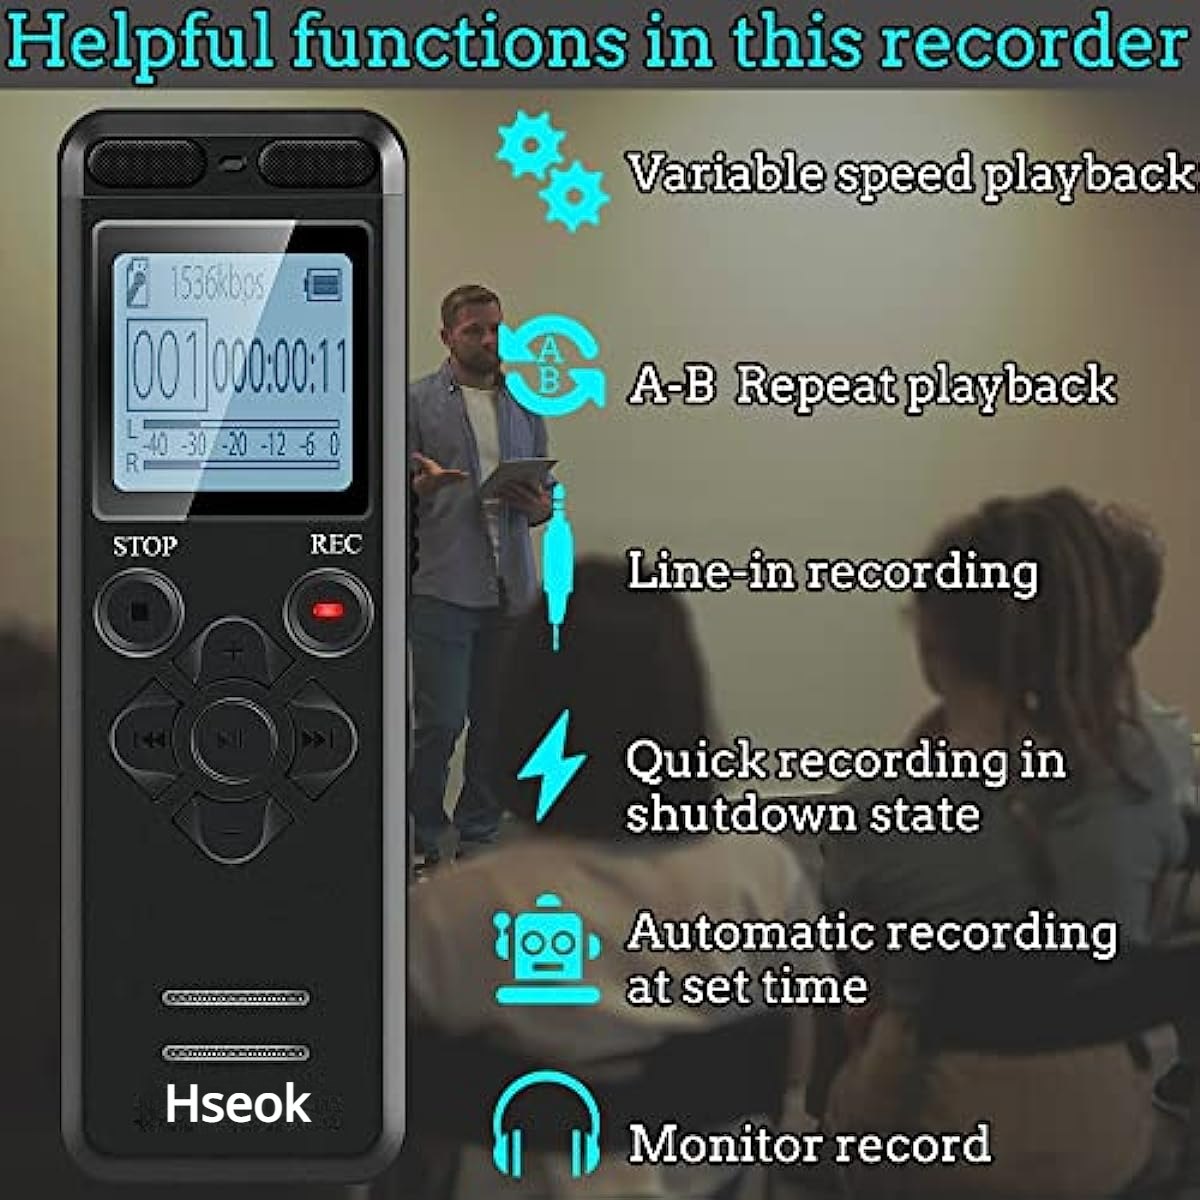 Hseok 72GB Digital Voice Recorder Voice Activated Recorder for Lectures Meetings - aiworth 5220 Hours Sound Audio Recorder Dictaphone Recording Device with Playback,MP3 Player,Password,Variable Speed